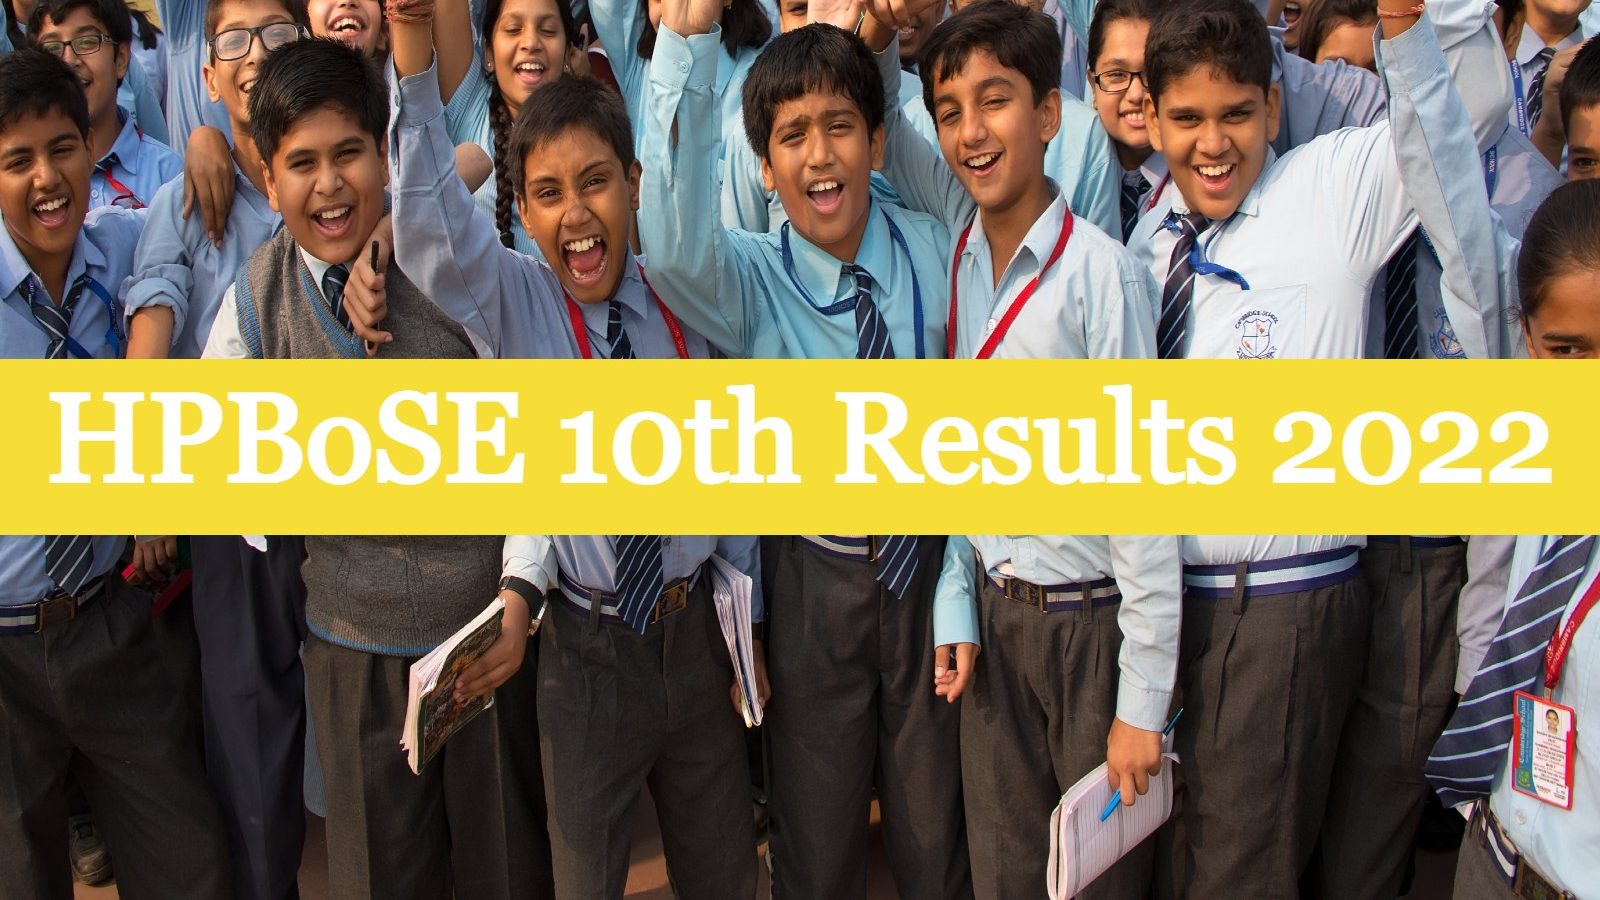 HPBoSE 10th Result Date & Time Announced: Know When & Where to Check HP Board Marks